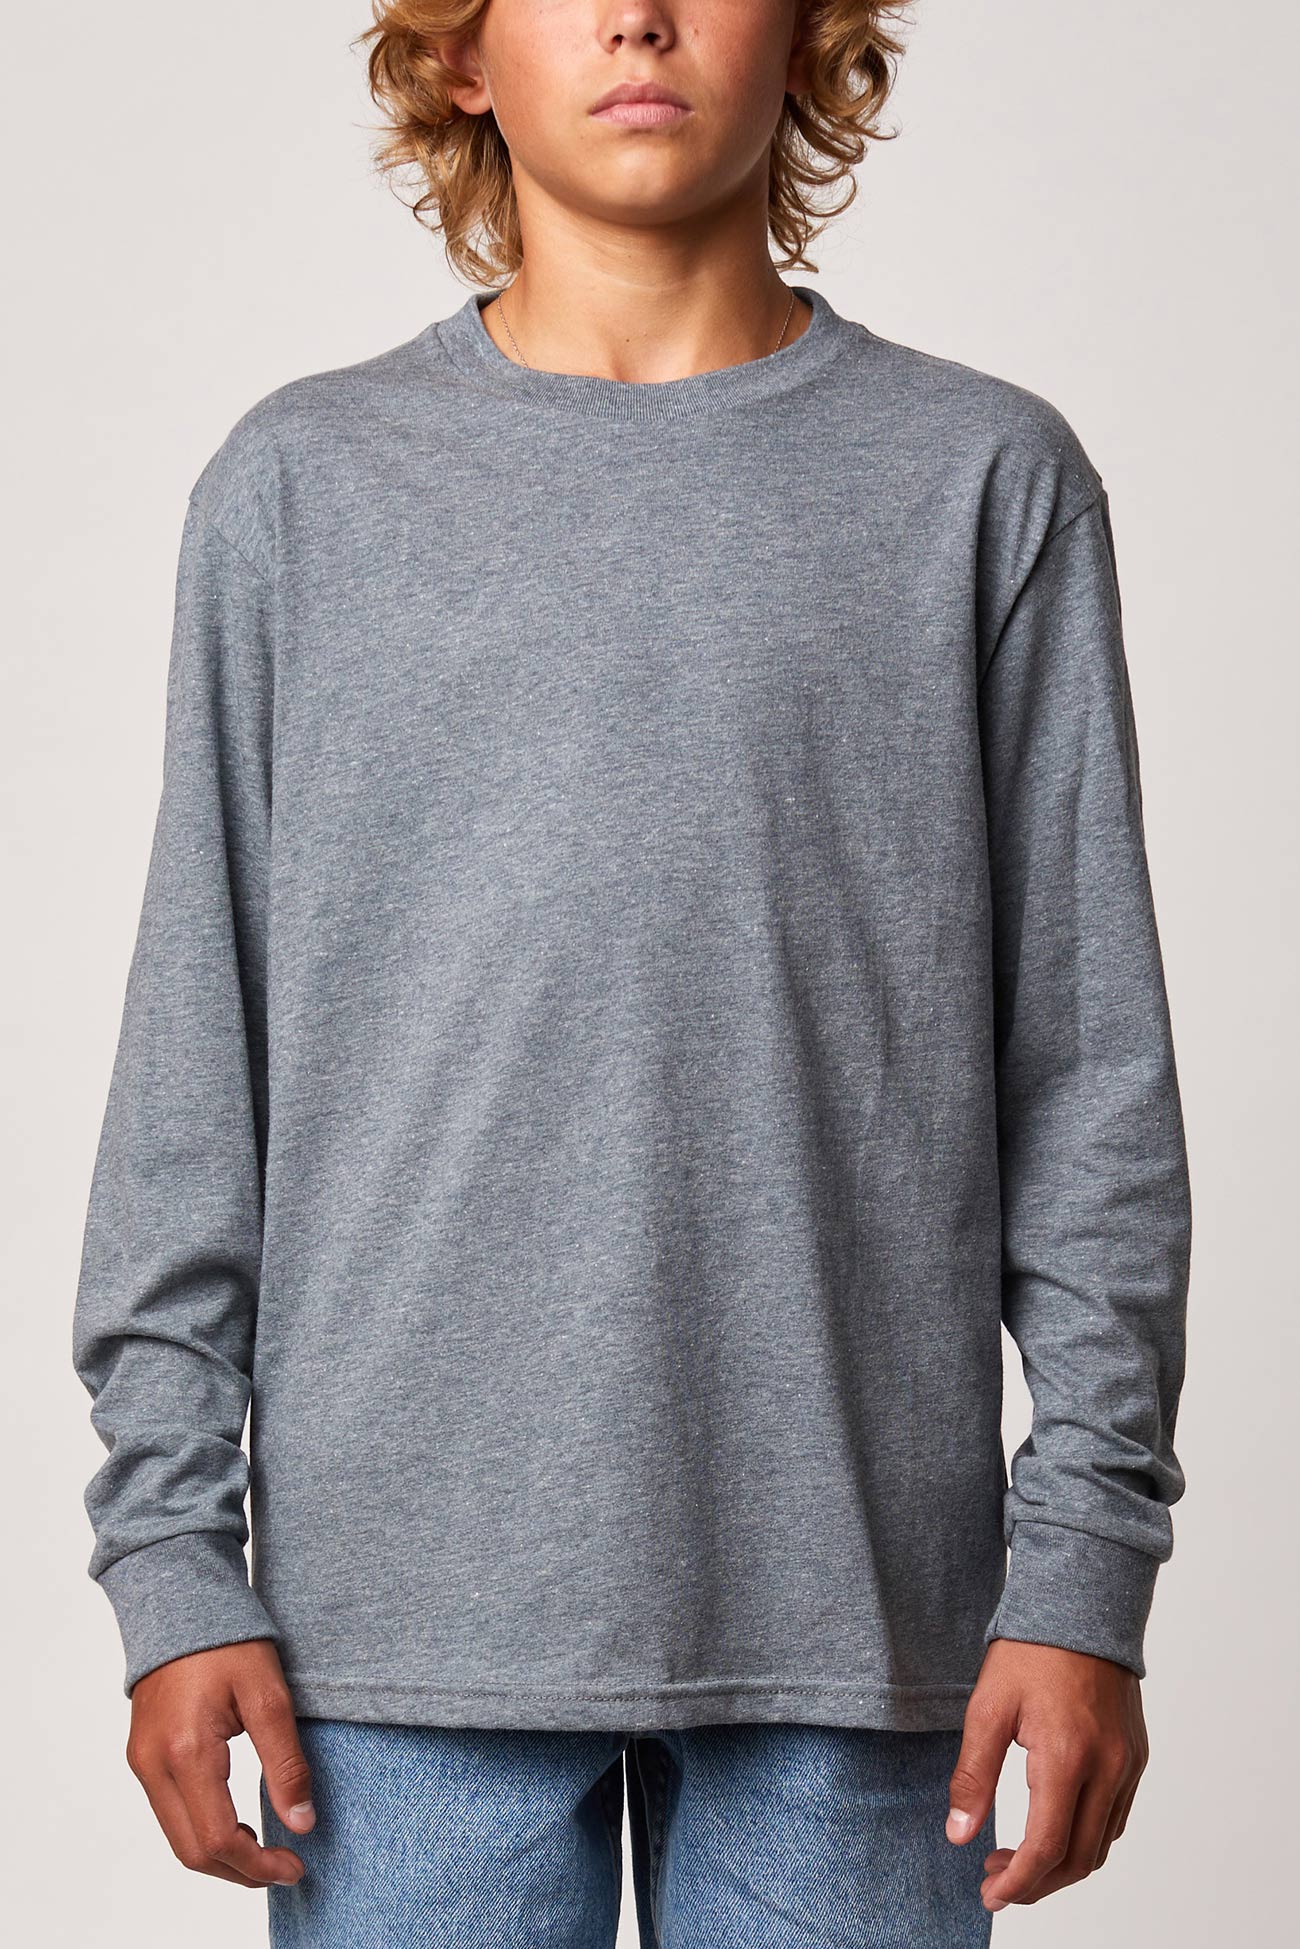 #SY4150LS Recycled - Long Sleeve Crew - Youth